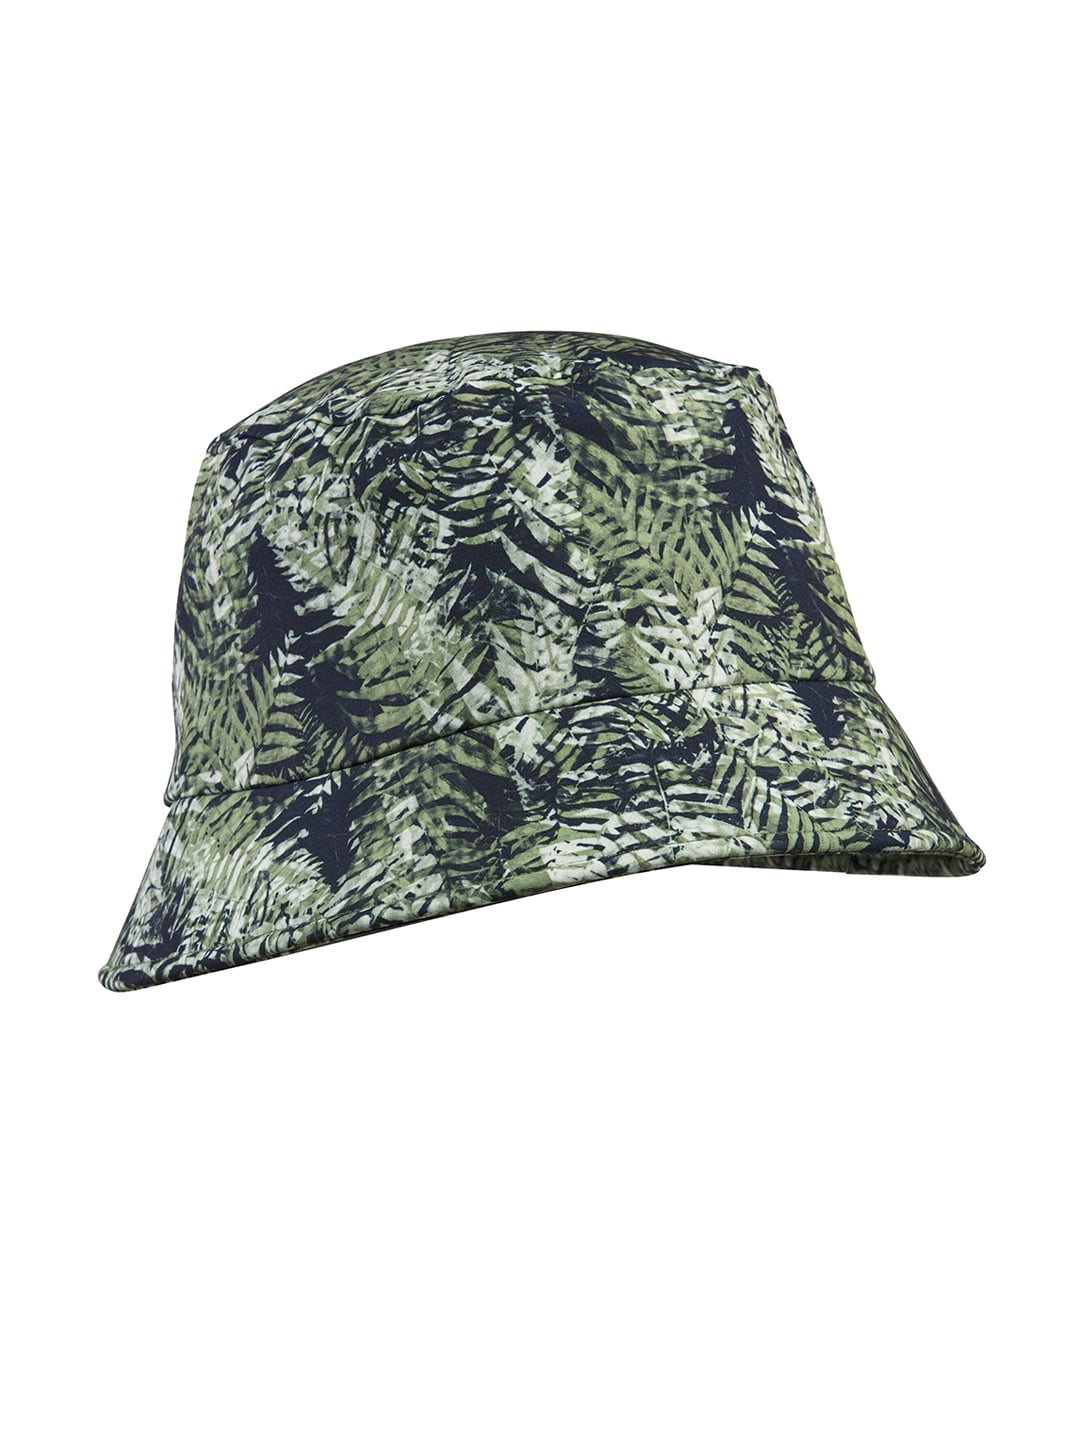 FORCLAZ By Decathlon Green Tropical Printed TREK 100 Hat Price in India